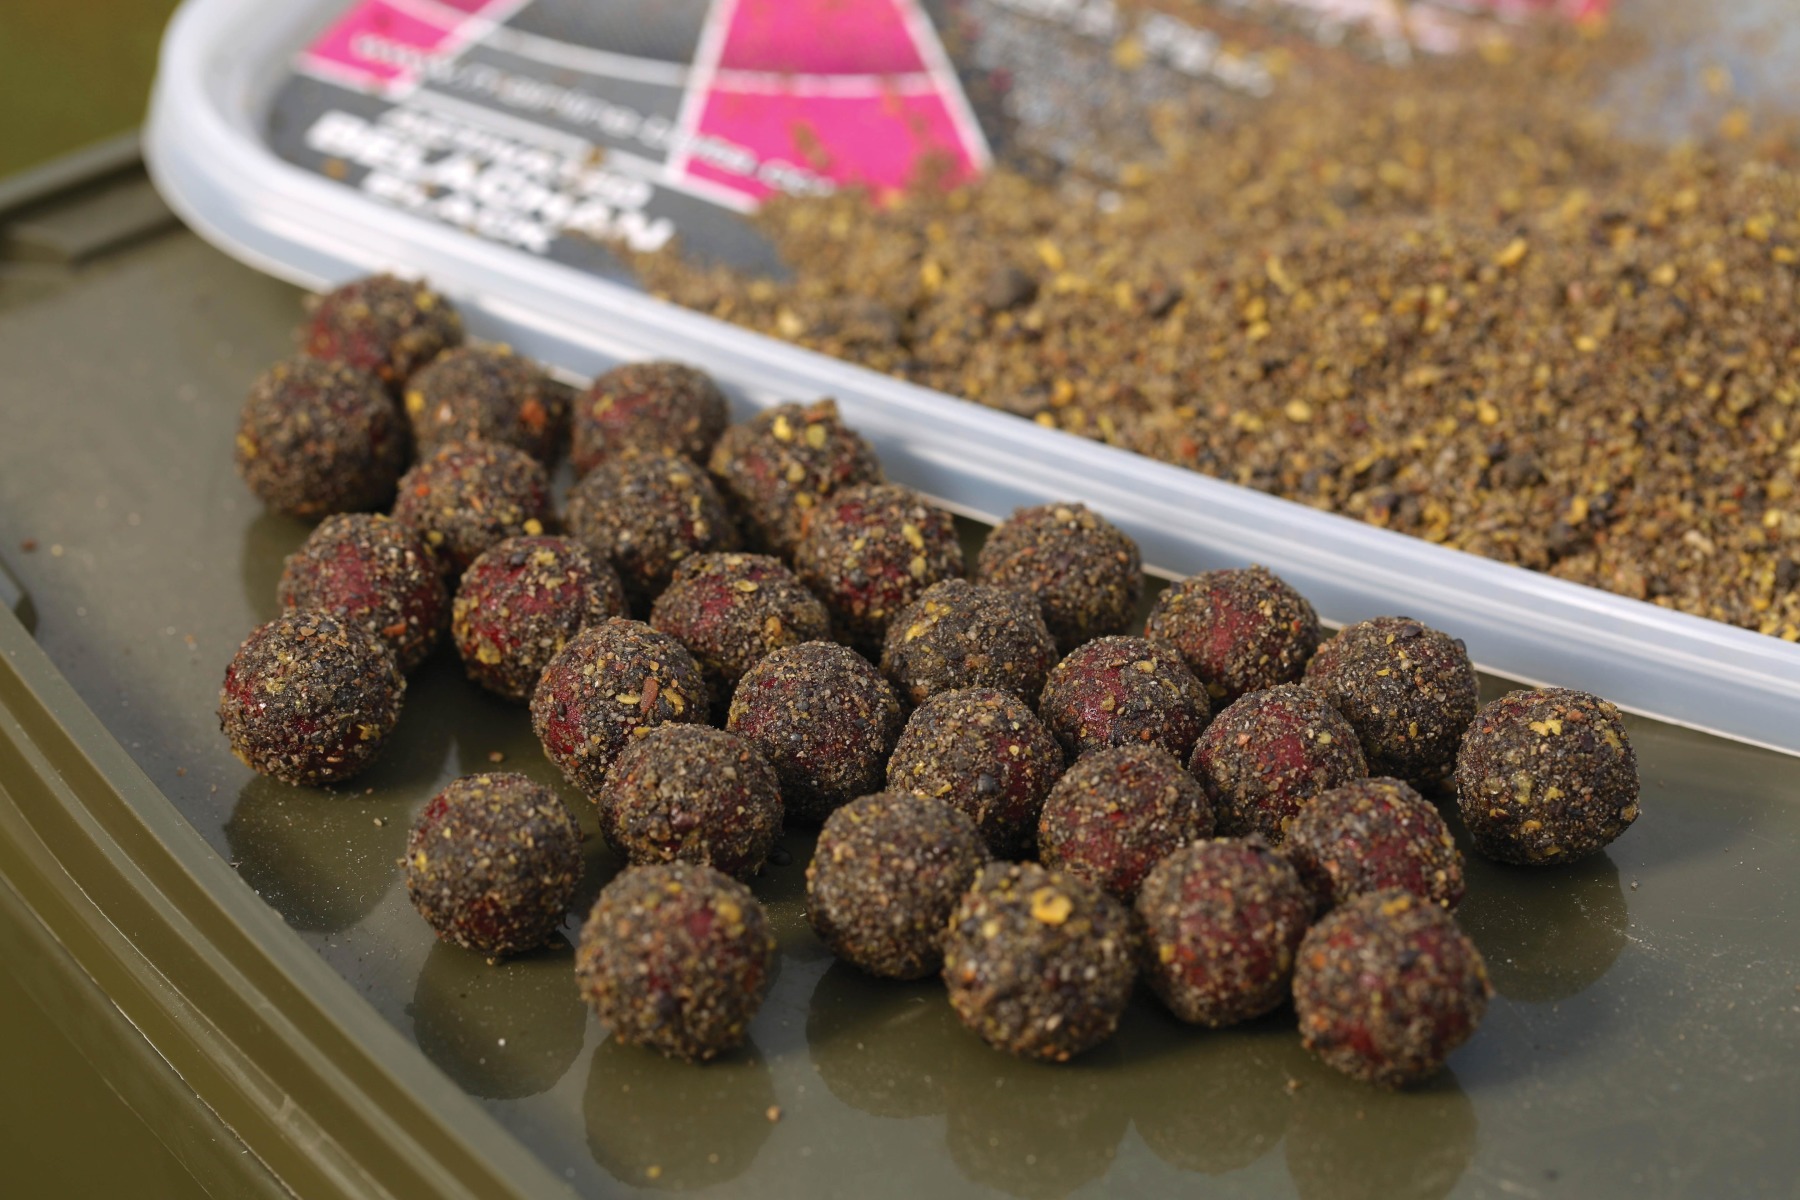 7. Leave the hookbaits to air-dry next so the groundbait coating/crust hardens off. 